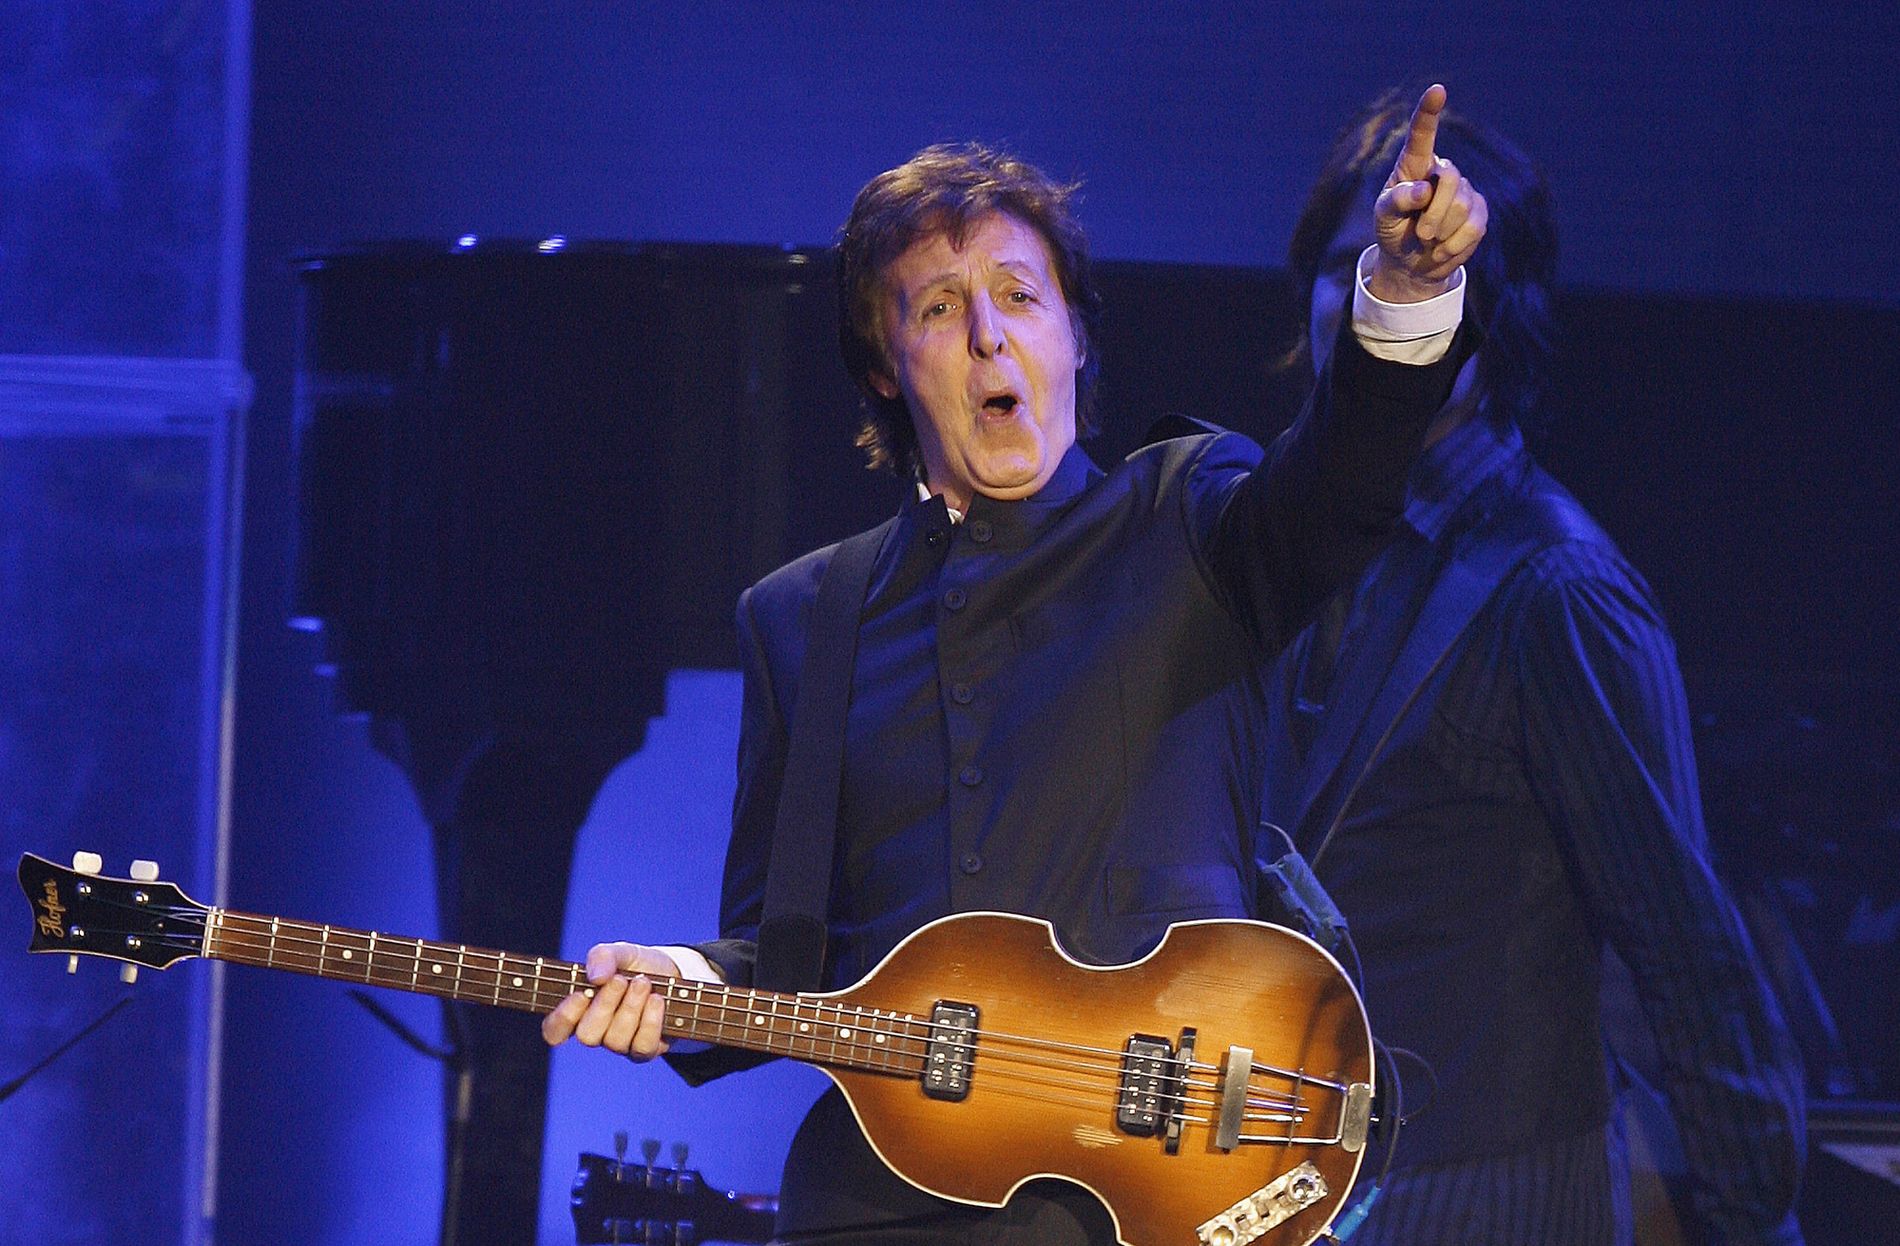 "McCartney 3, 2, 1" TV review: The Miracle Macca - VG